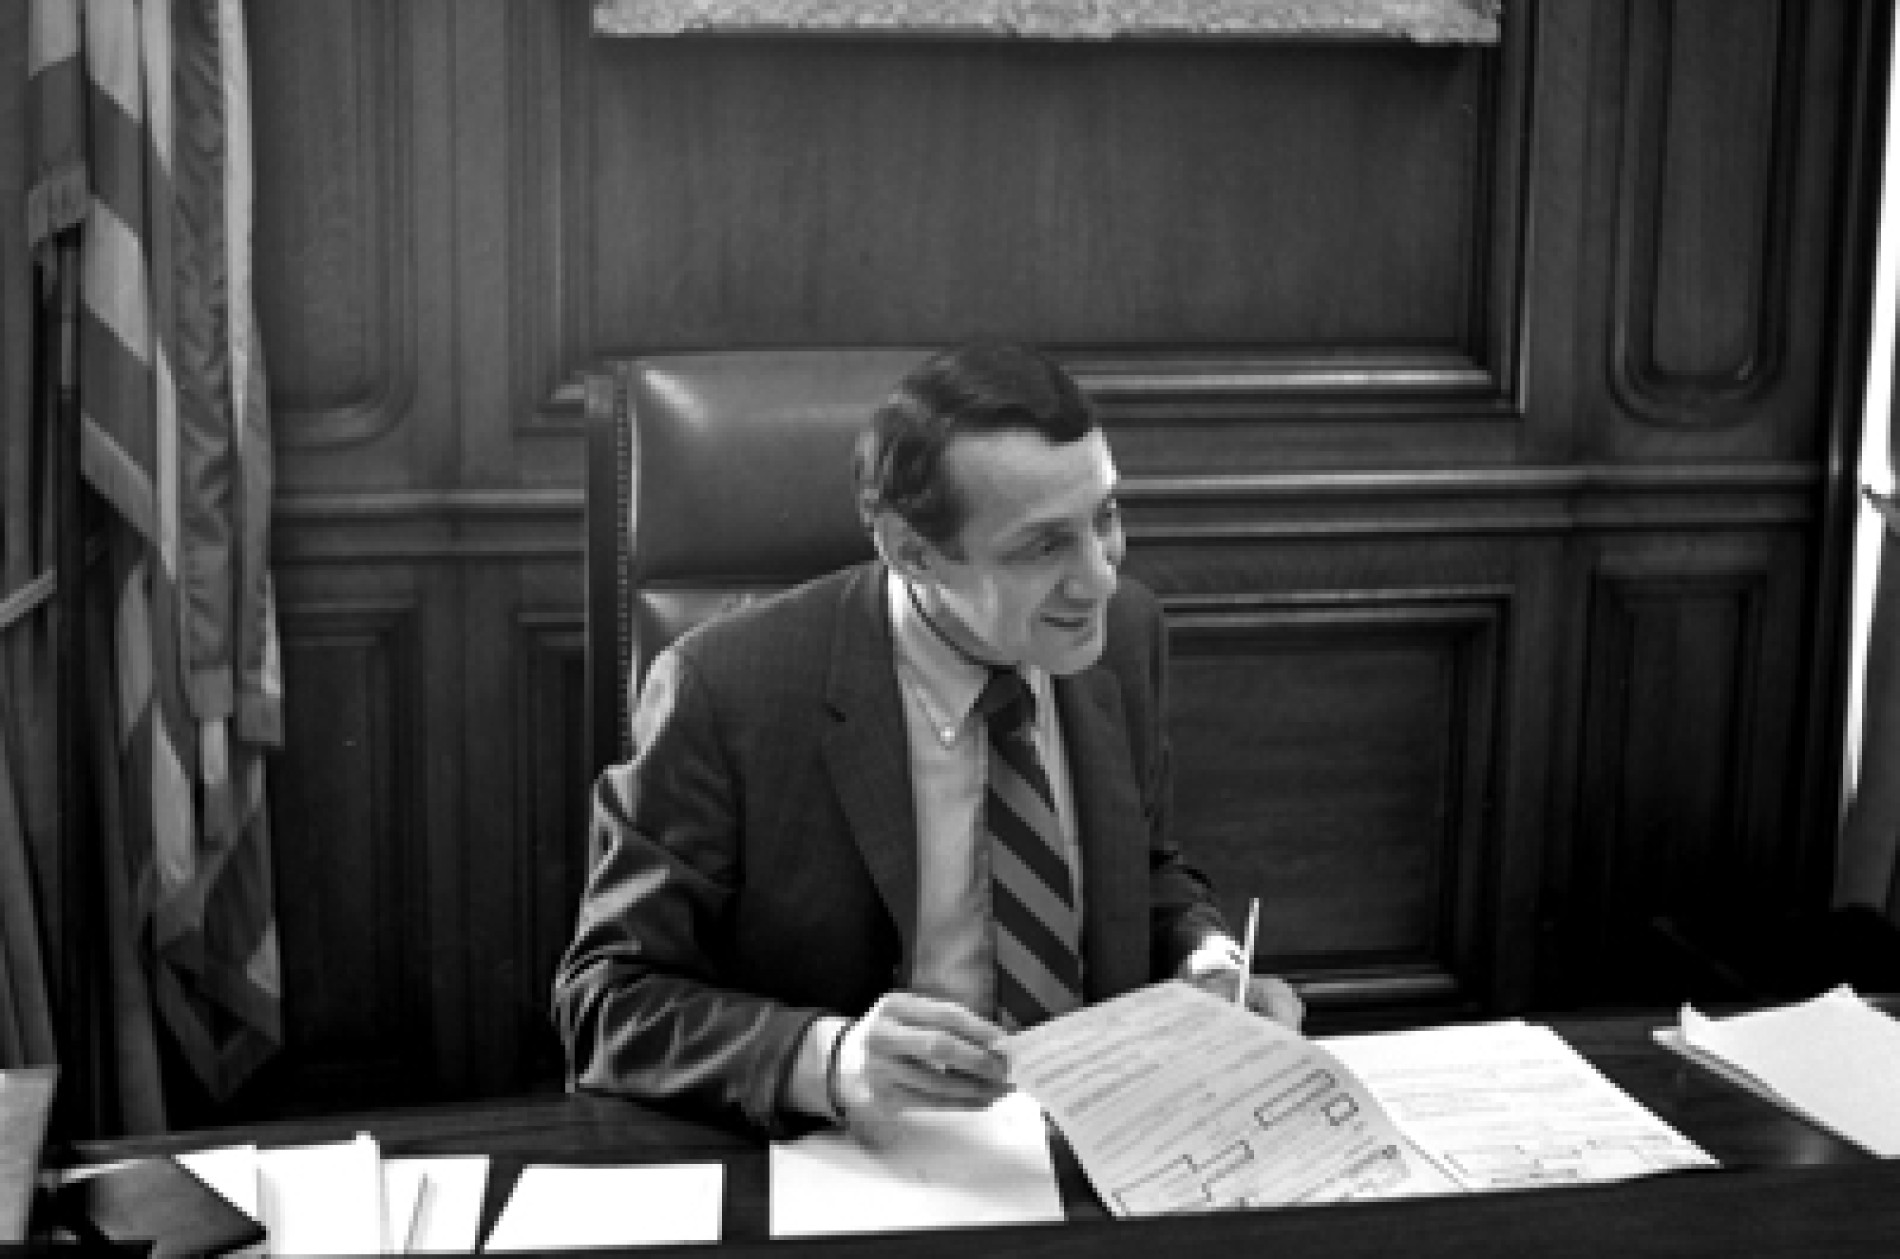 Person wearing suit seated behind a desk in a talk-backed chair with a wood-paneled wall, framed artwork, and flag alongside.